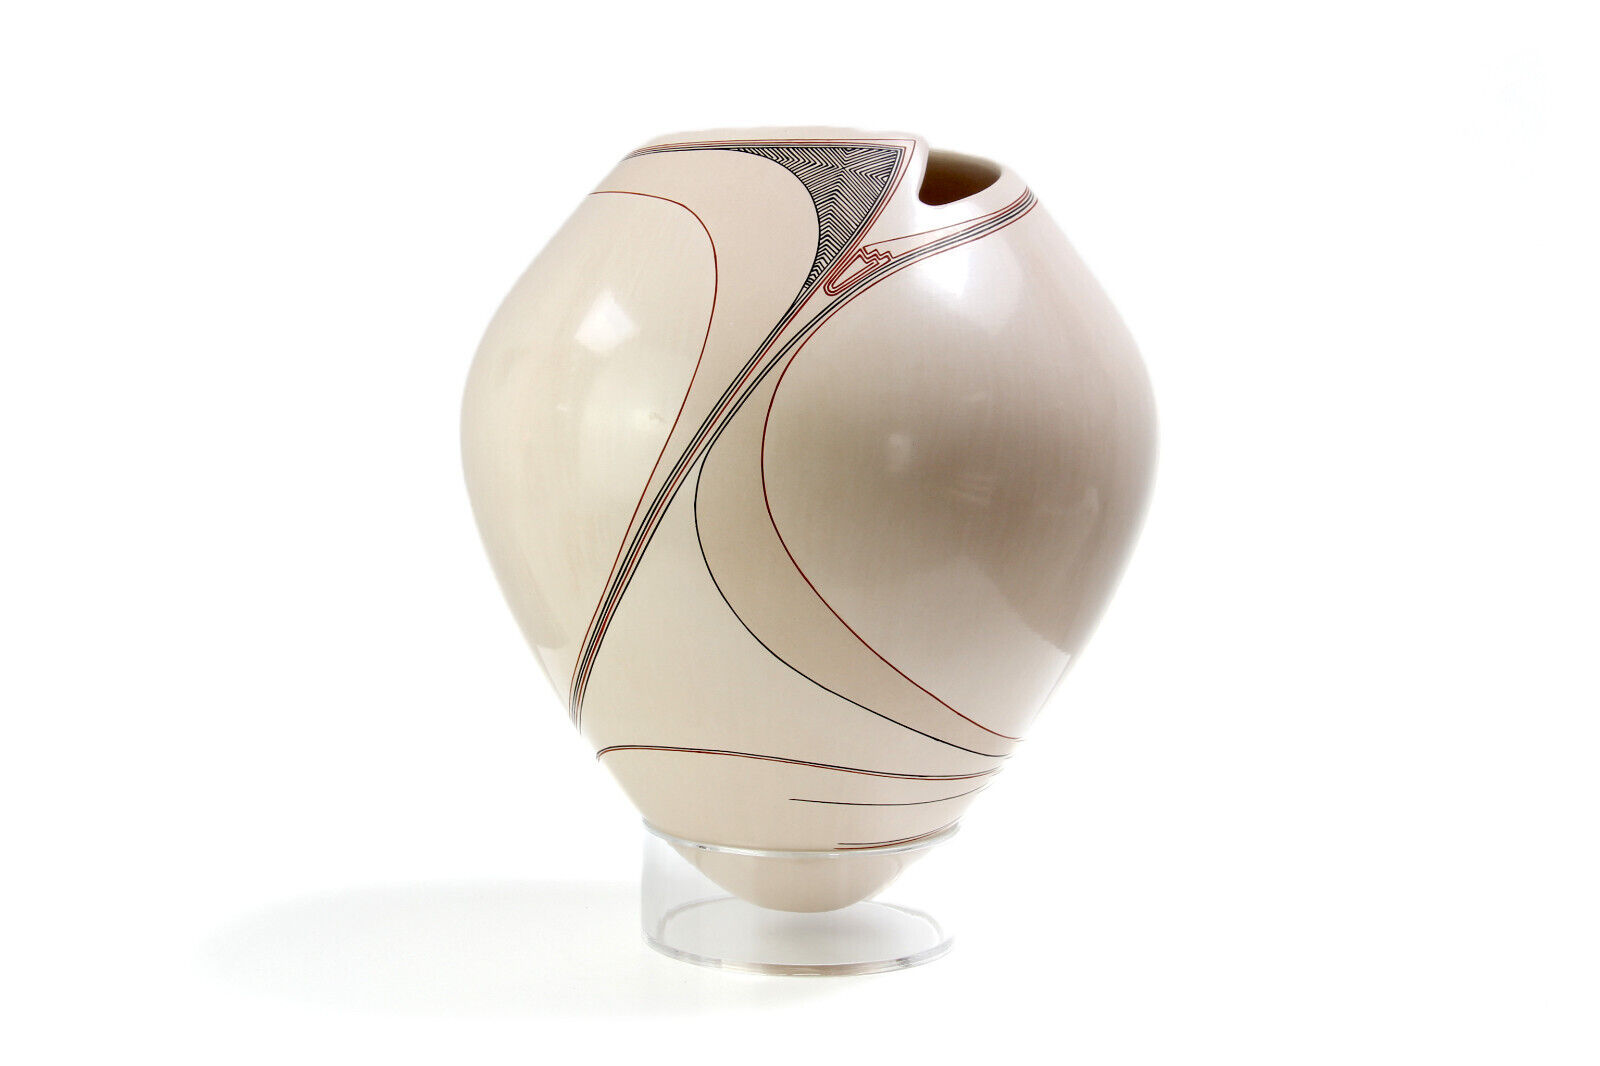 Mata Ortiz Pottery | Amplitude by Diego Valles | 11 in. | Mexican ceramic art